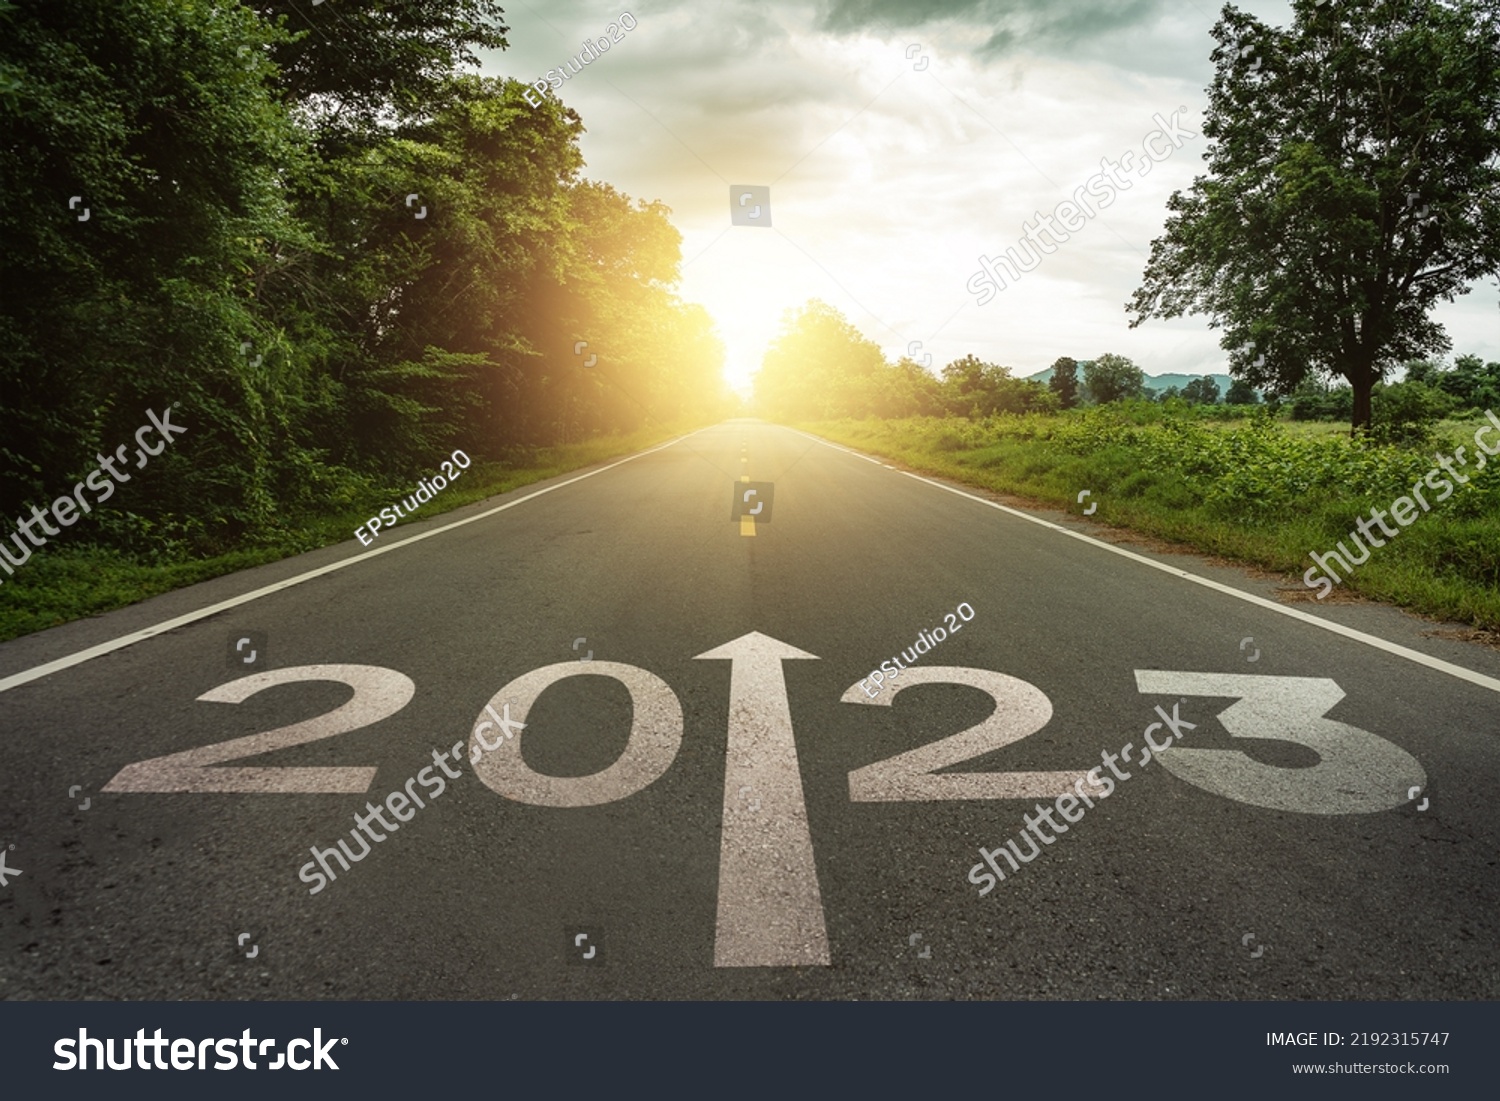 New year 2023 or straightforward concept. Text 2023 written on the road in the middle of asphalt road at sunset.Concept of planning and challenge, business strategy, opportunity ,hope, new life change #2192315747